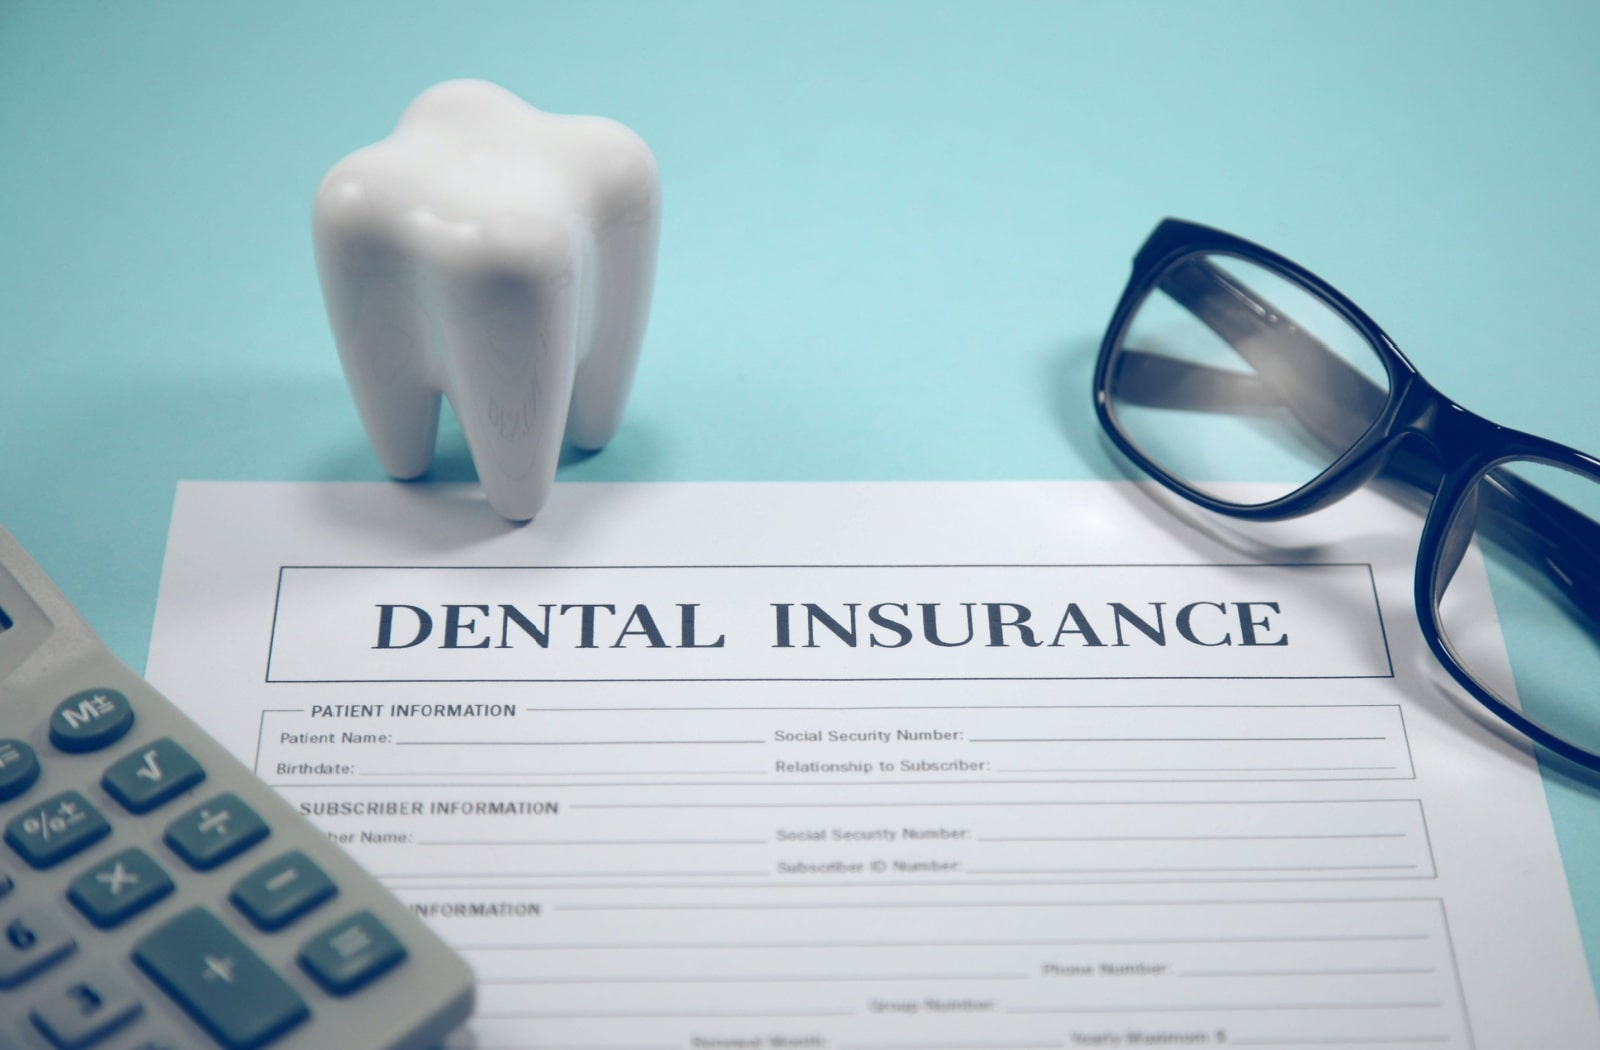 A dental insurance form sitting next to a calculator, a pair of reading glasses, and a plastic model of a tooth
